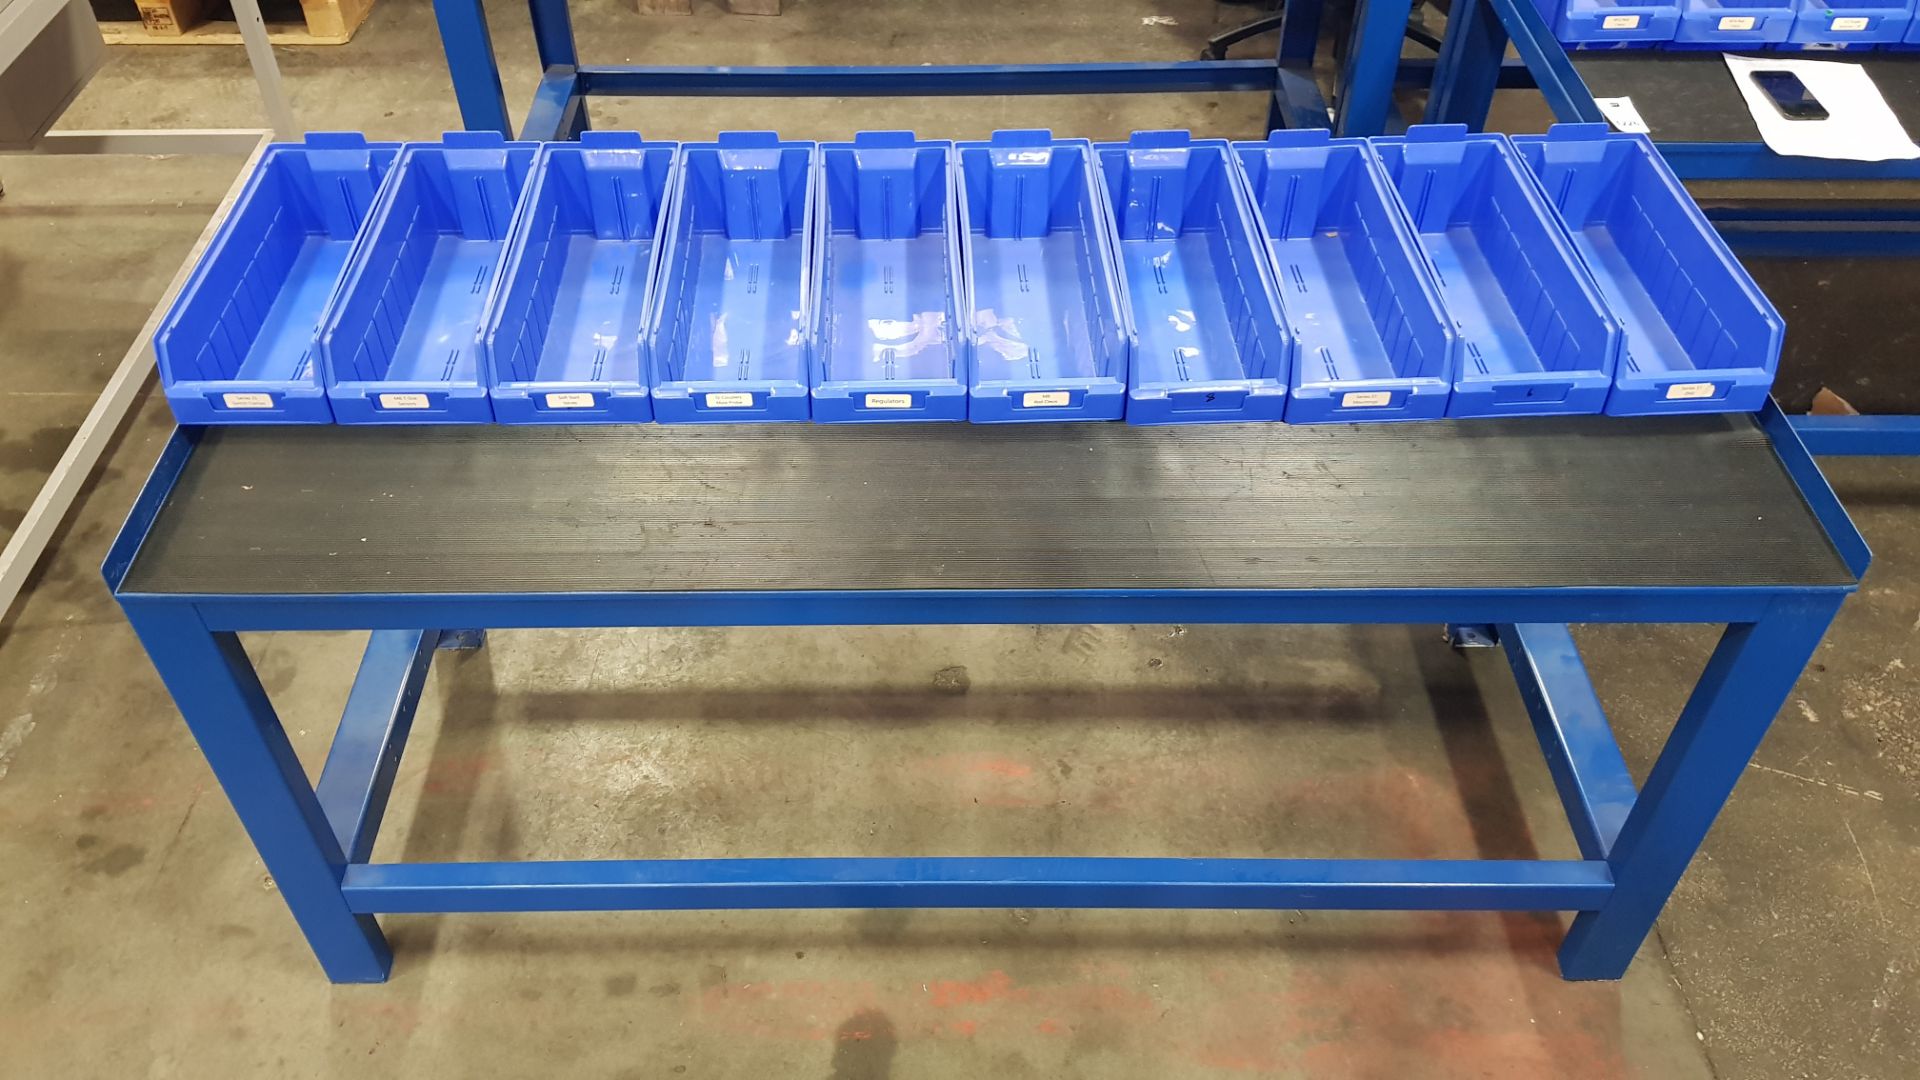 1 X INDUSTRIAL WORK BENCH. COMES WITH 10 BLUE TRAYS. OVERALL DIMENSIONS 180x66x80cm